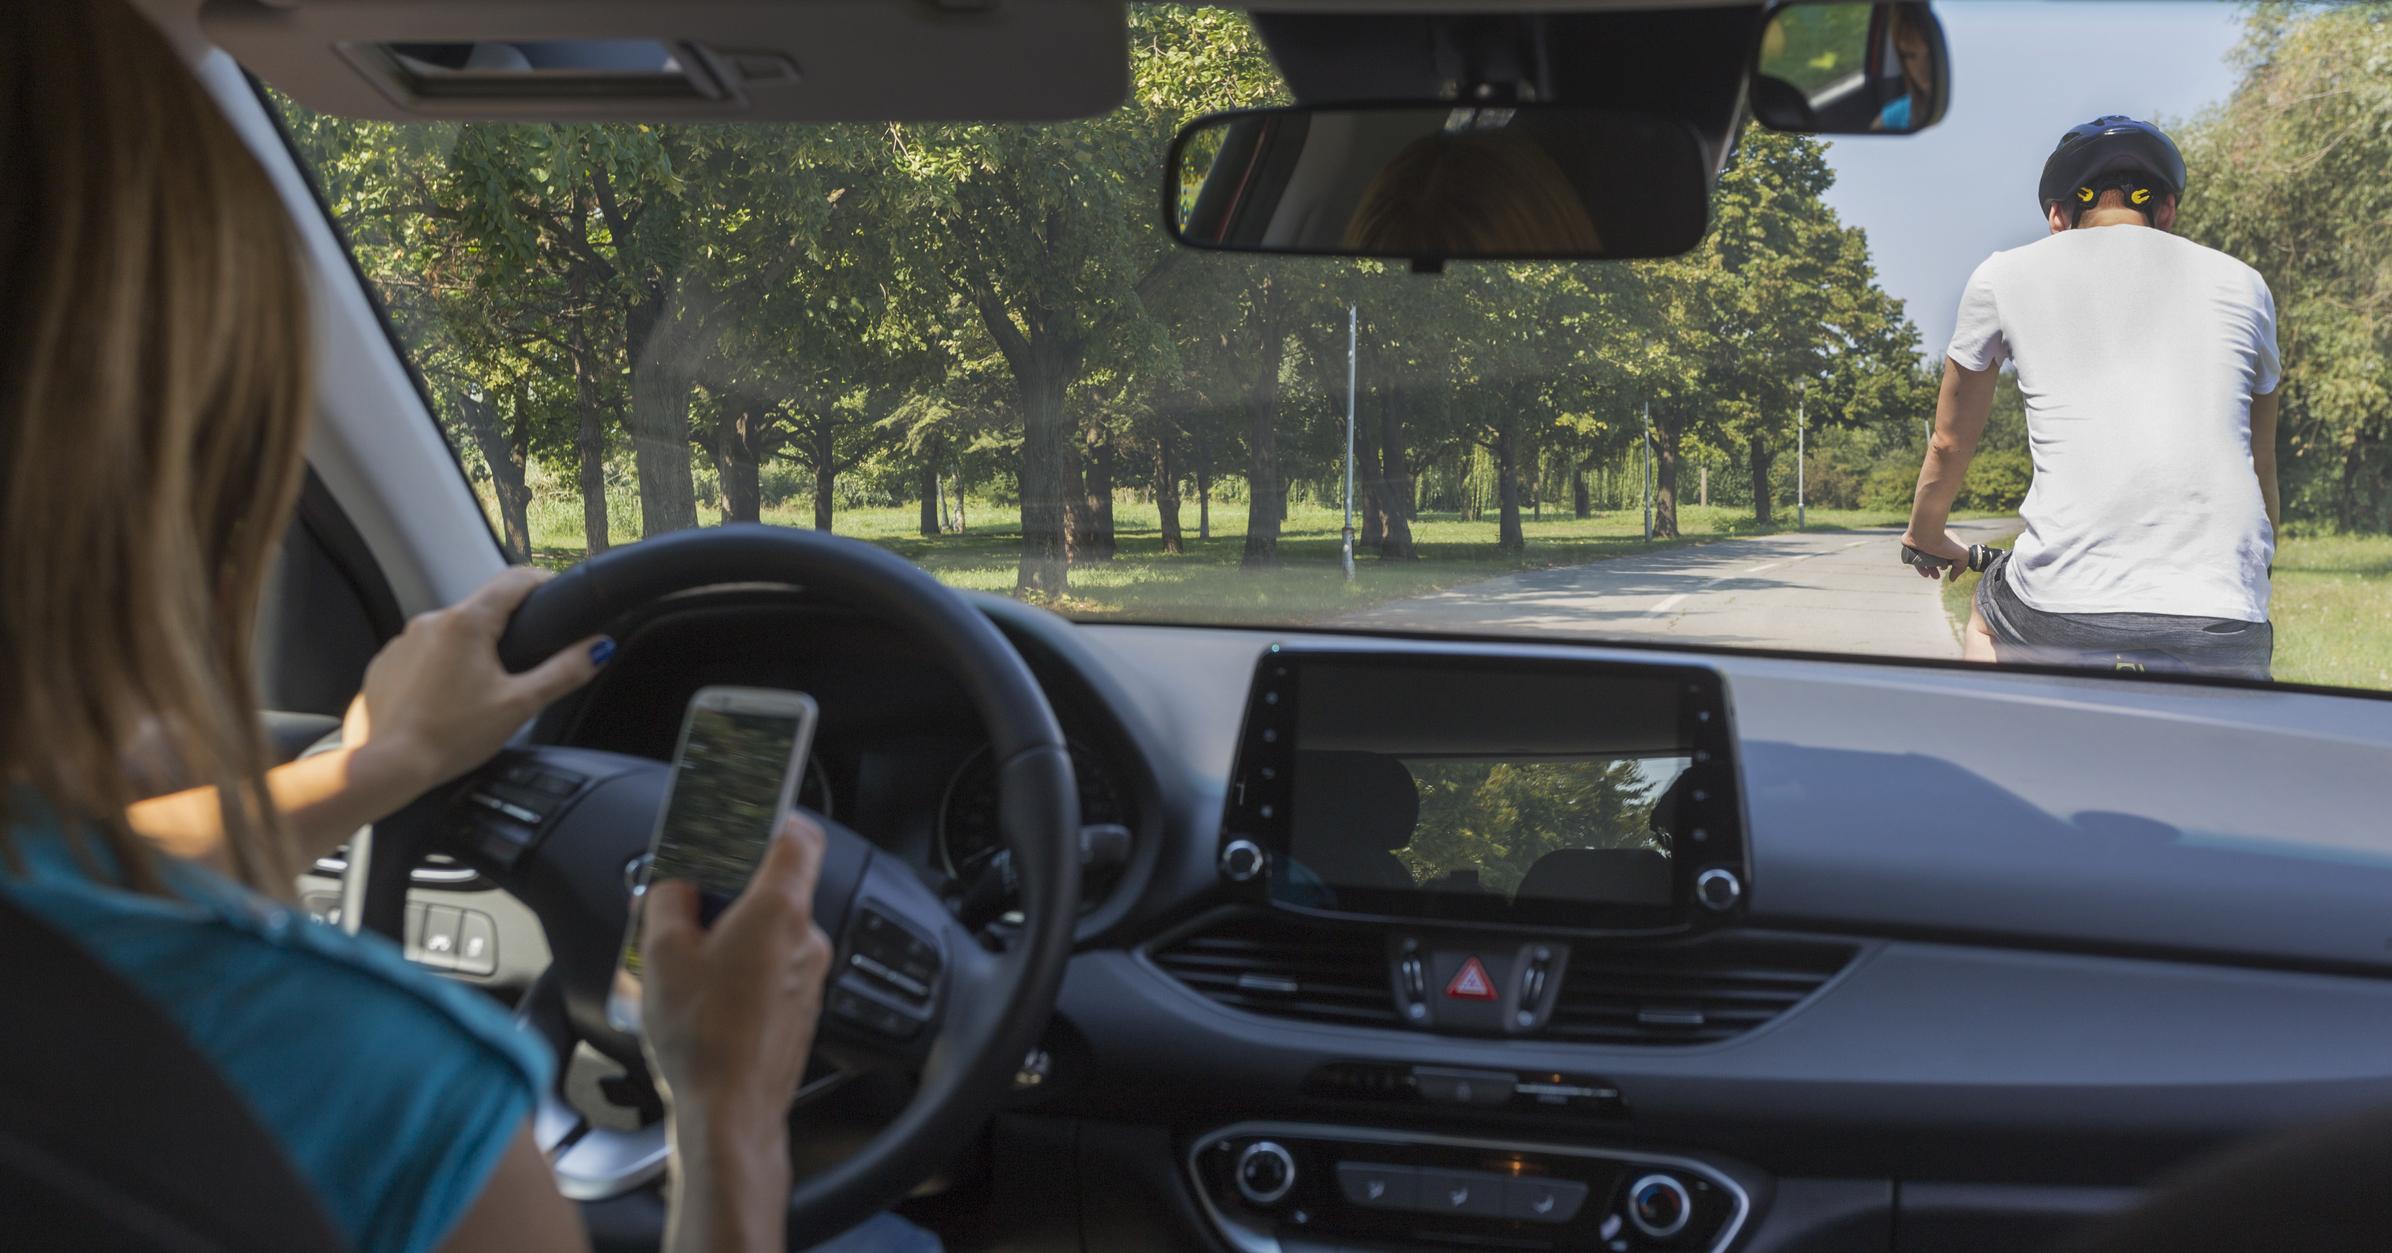 6 Tips For Reducing Distracted Driving